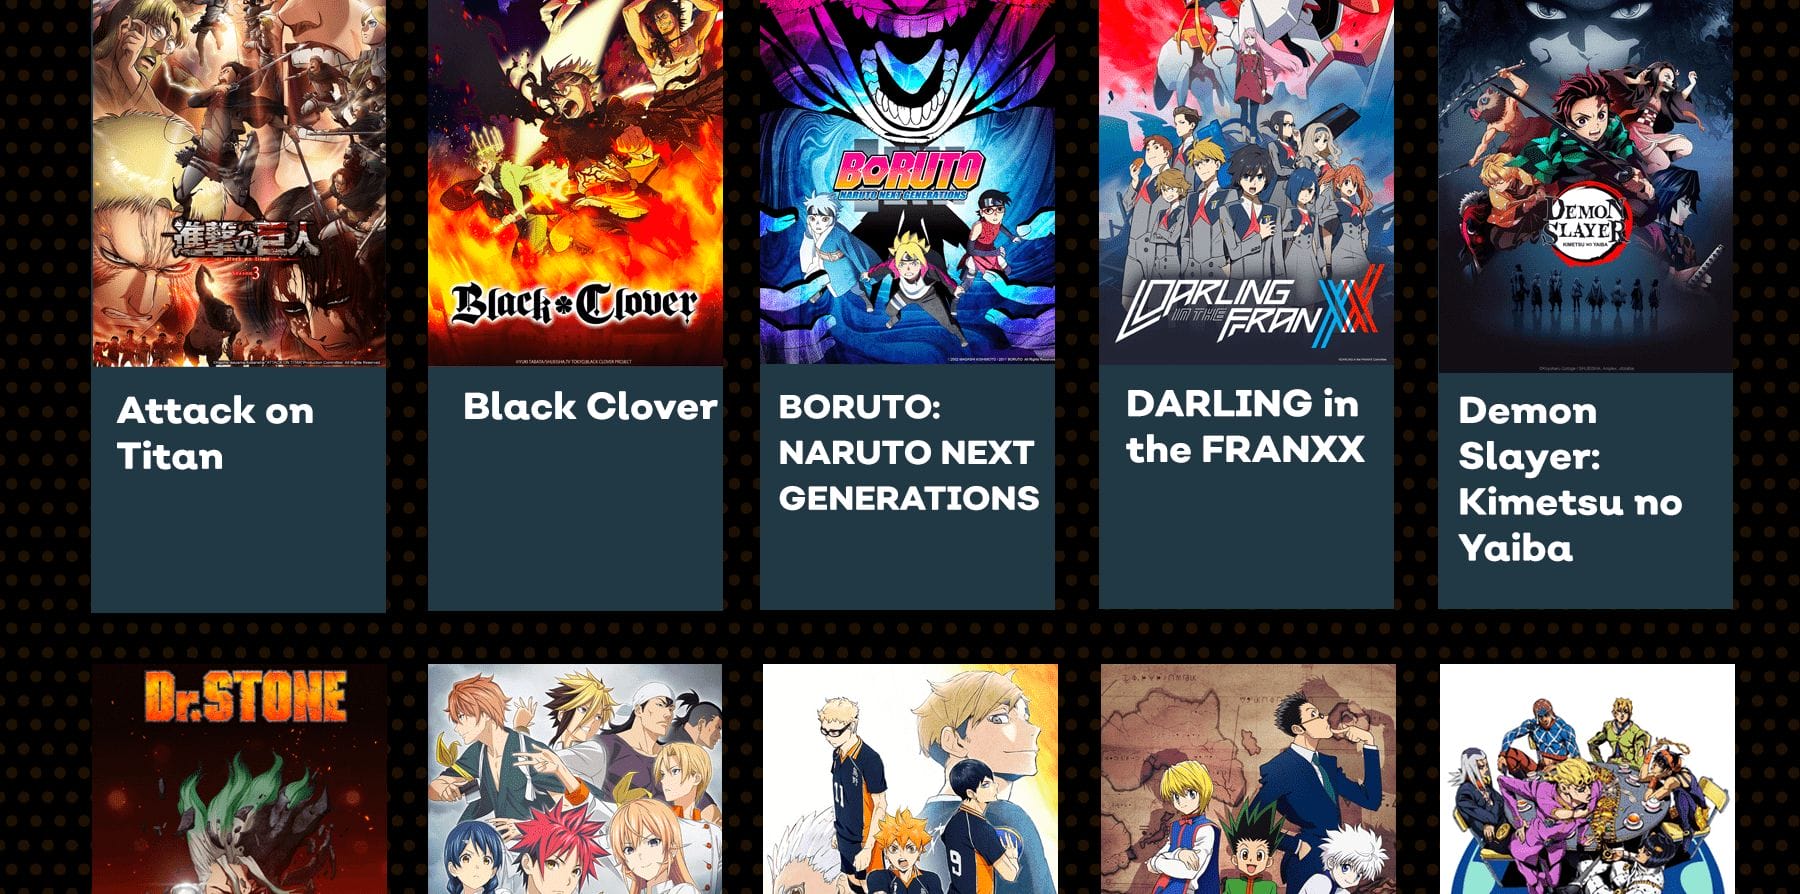 Crunchyroll Shares Top 20 Most Watched Anime Series during Winter 2020